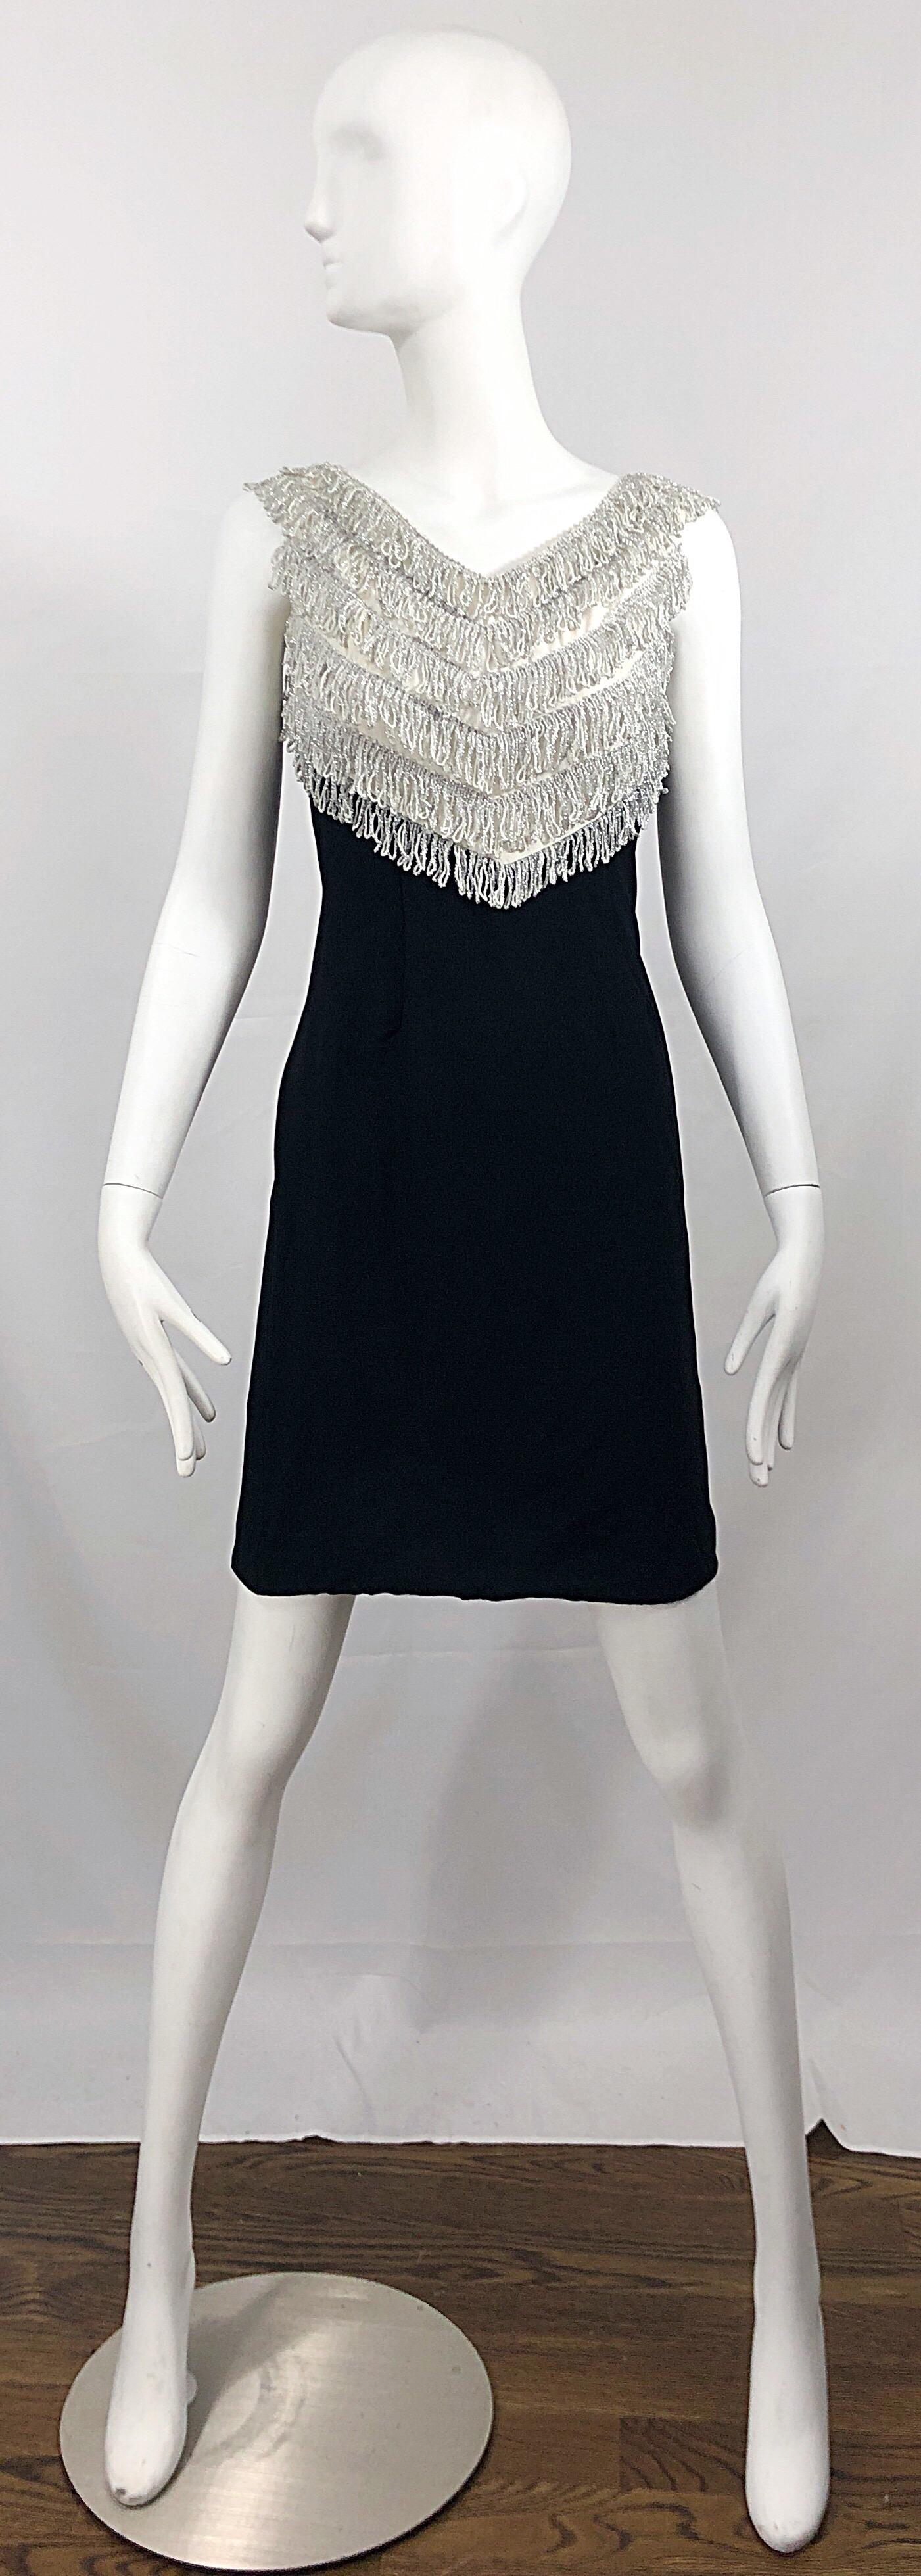 Chic 1960s black and metallic silver tassel fringed bodice sleeveless crepe shift dress! The perfect little black dress, with just the right amount of edge. Silver tassel fringe on the bodice. Flattering shift shape. Full metal zipper up the back